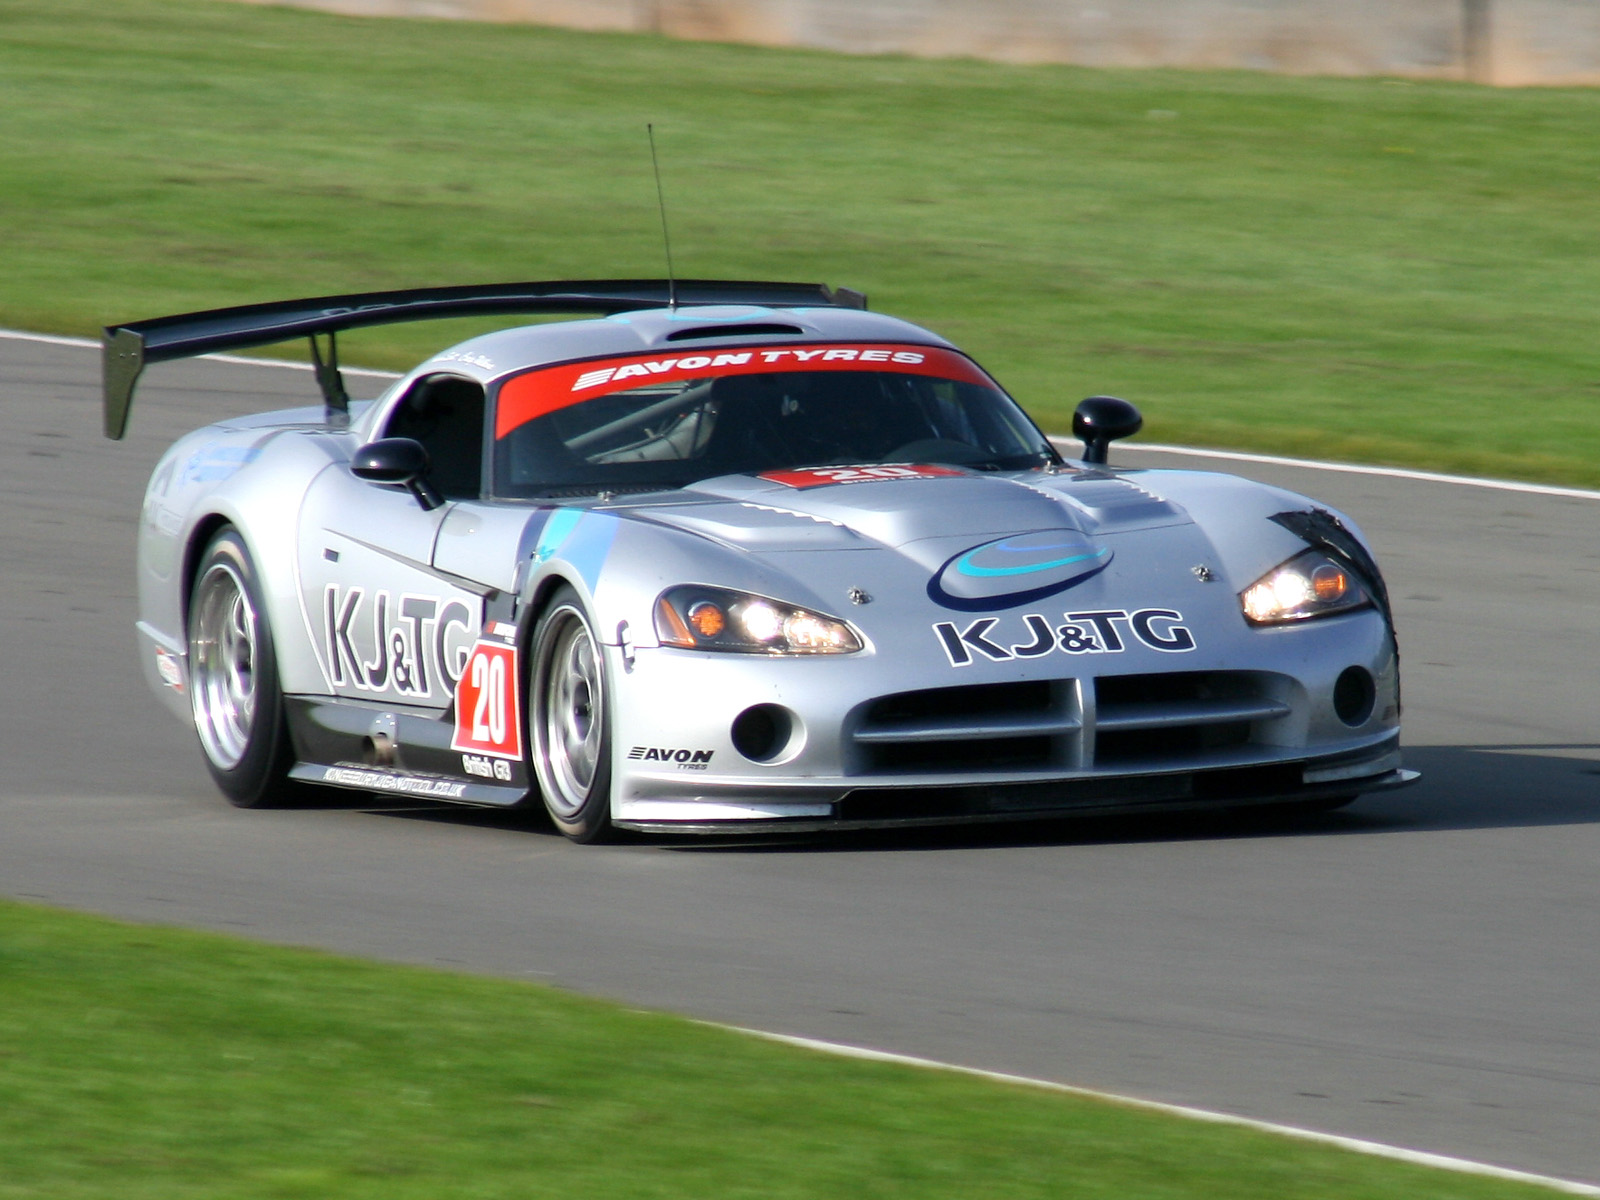 20, 02dodge, Viper, Srt10, Competition, Coupe, Race, Racing, Supercar, Supercars, Go Wallpaper